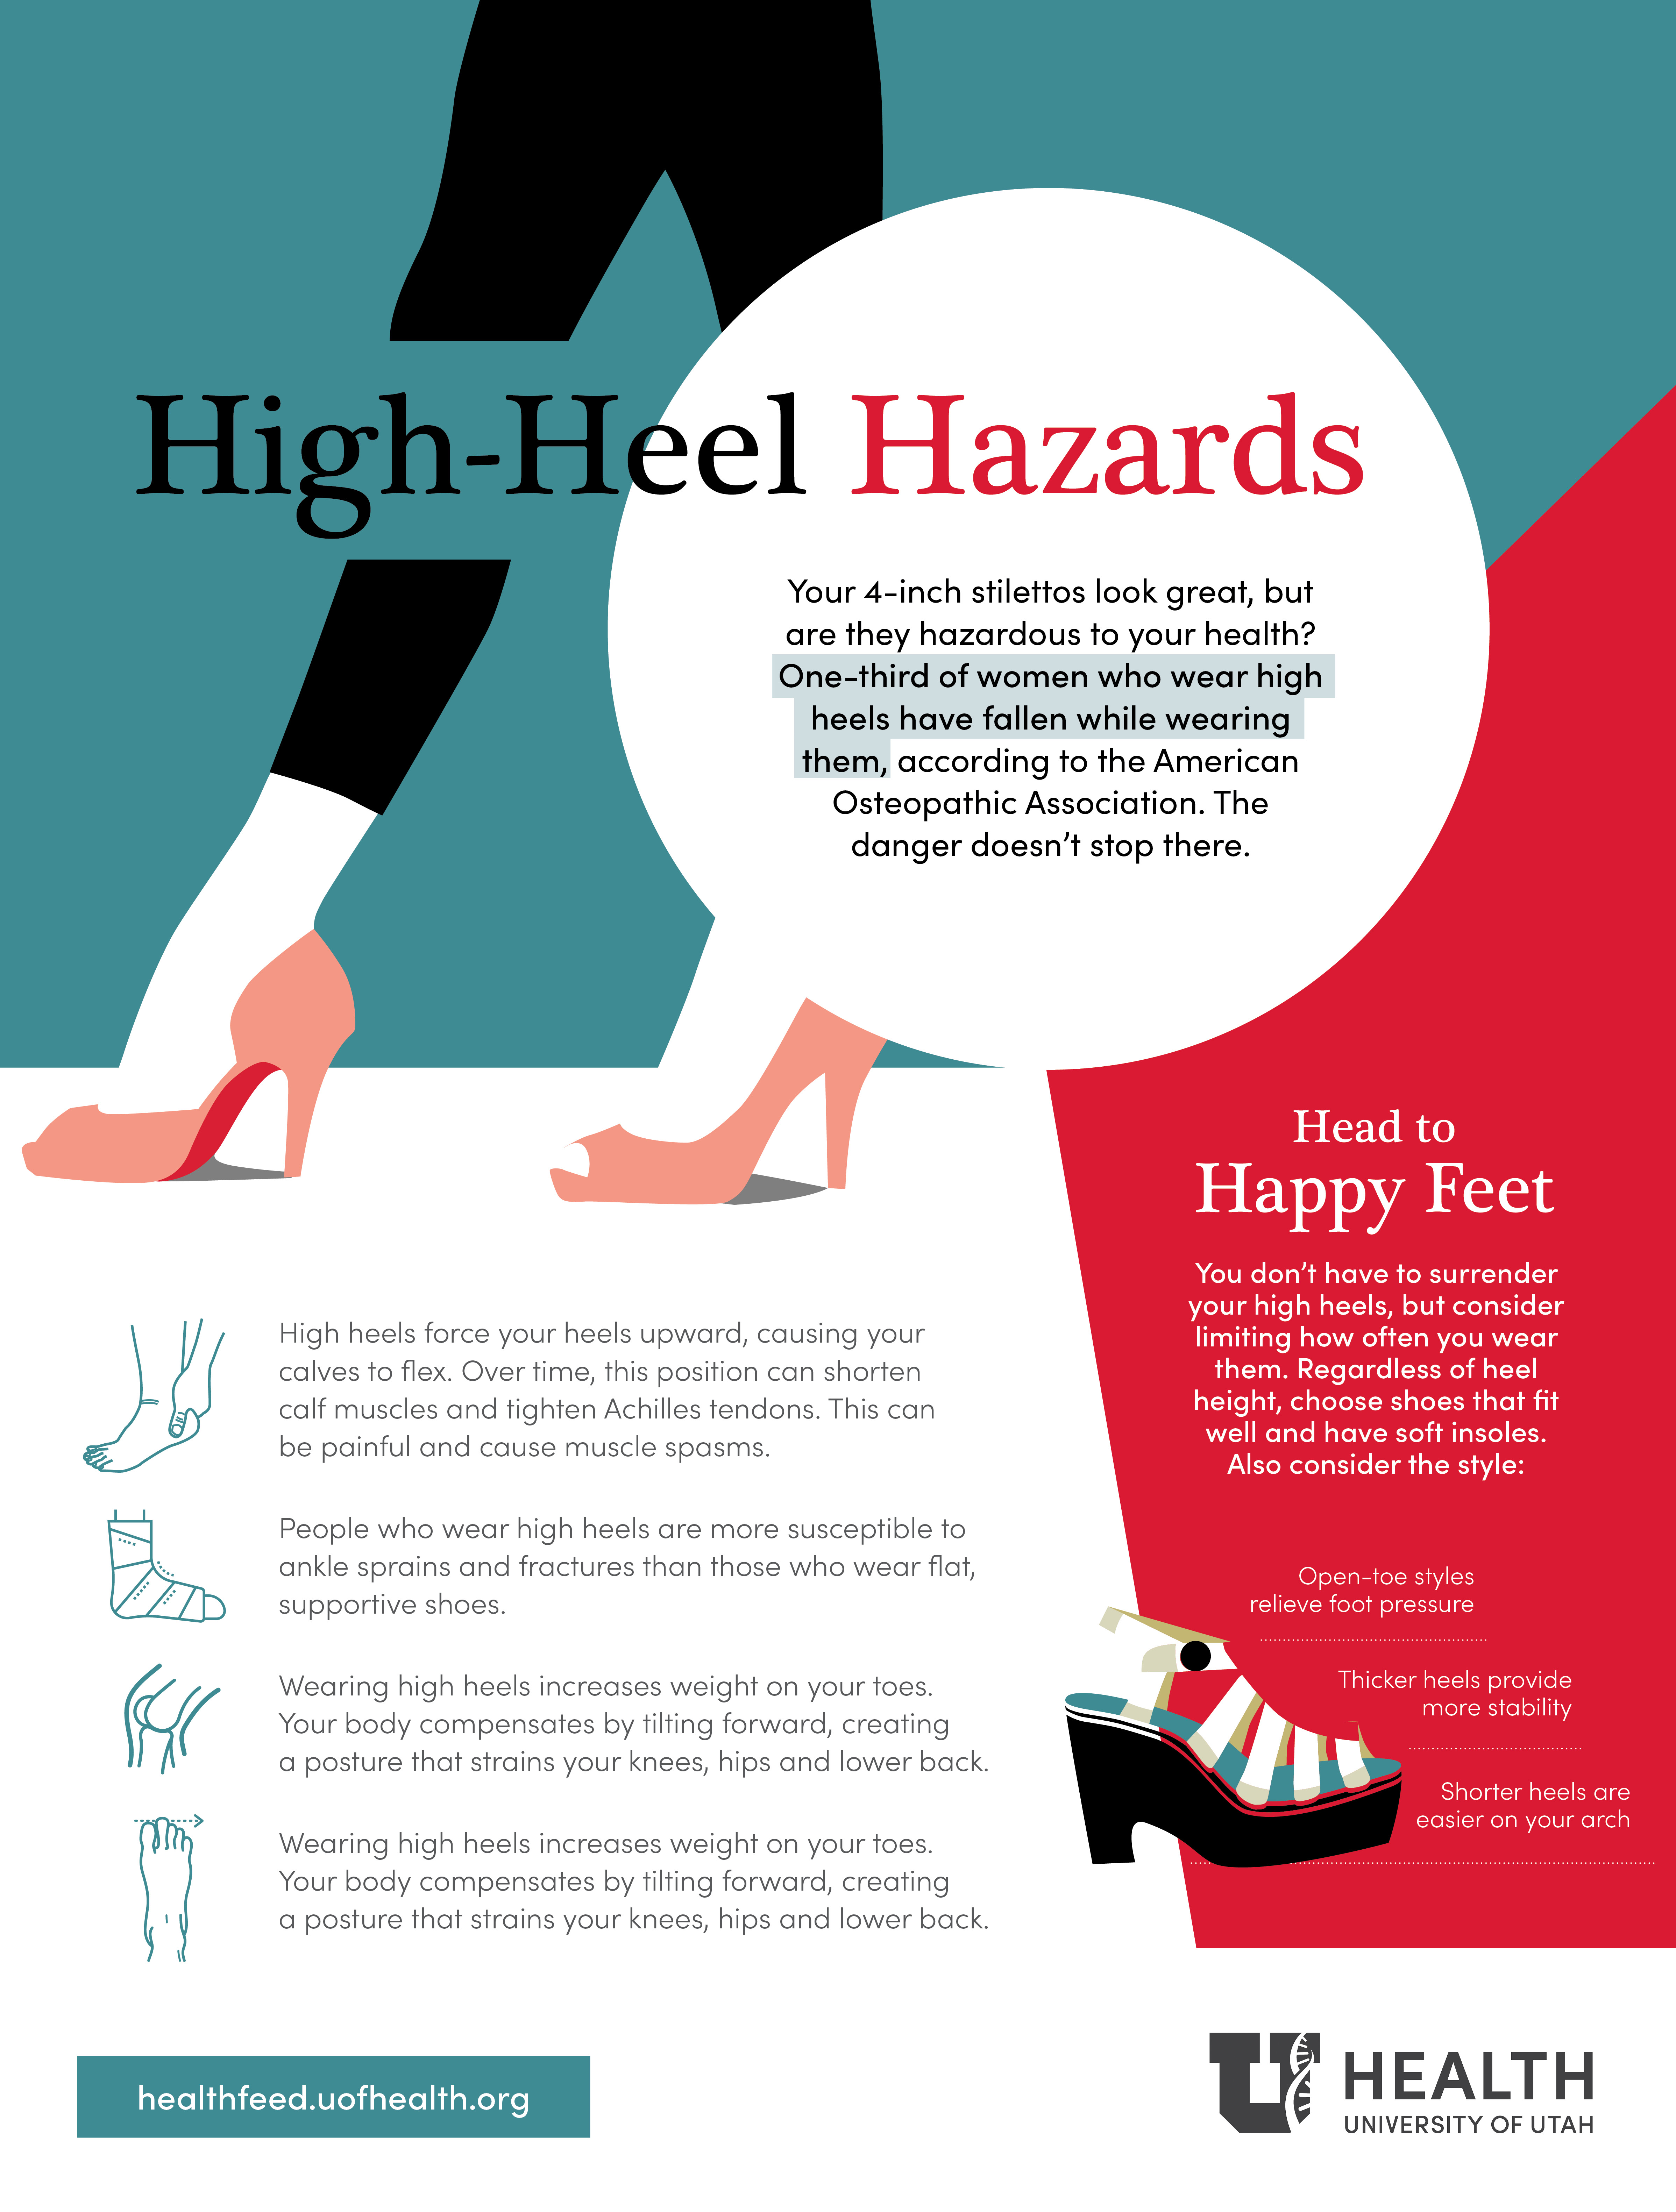 How High Heels, Painful Shoes Are Linked to Cancer and Bad Health